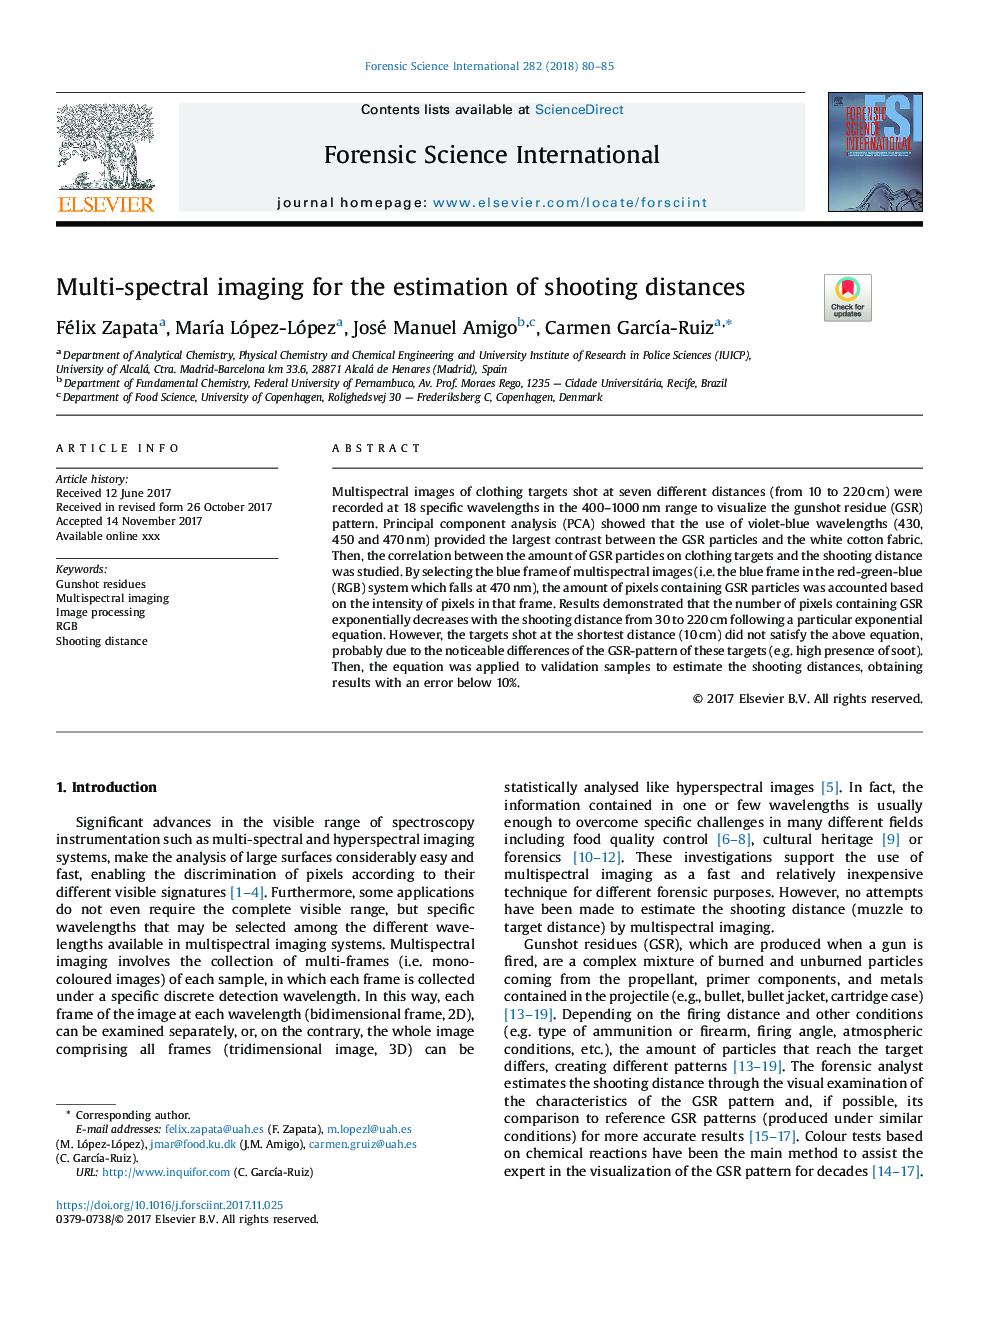 Multi-spectral imaging for the estimation of shooting distances